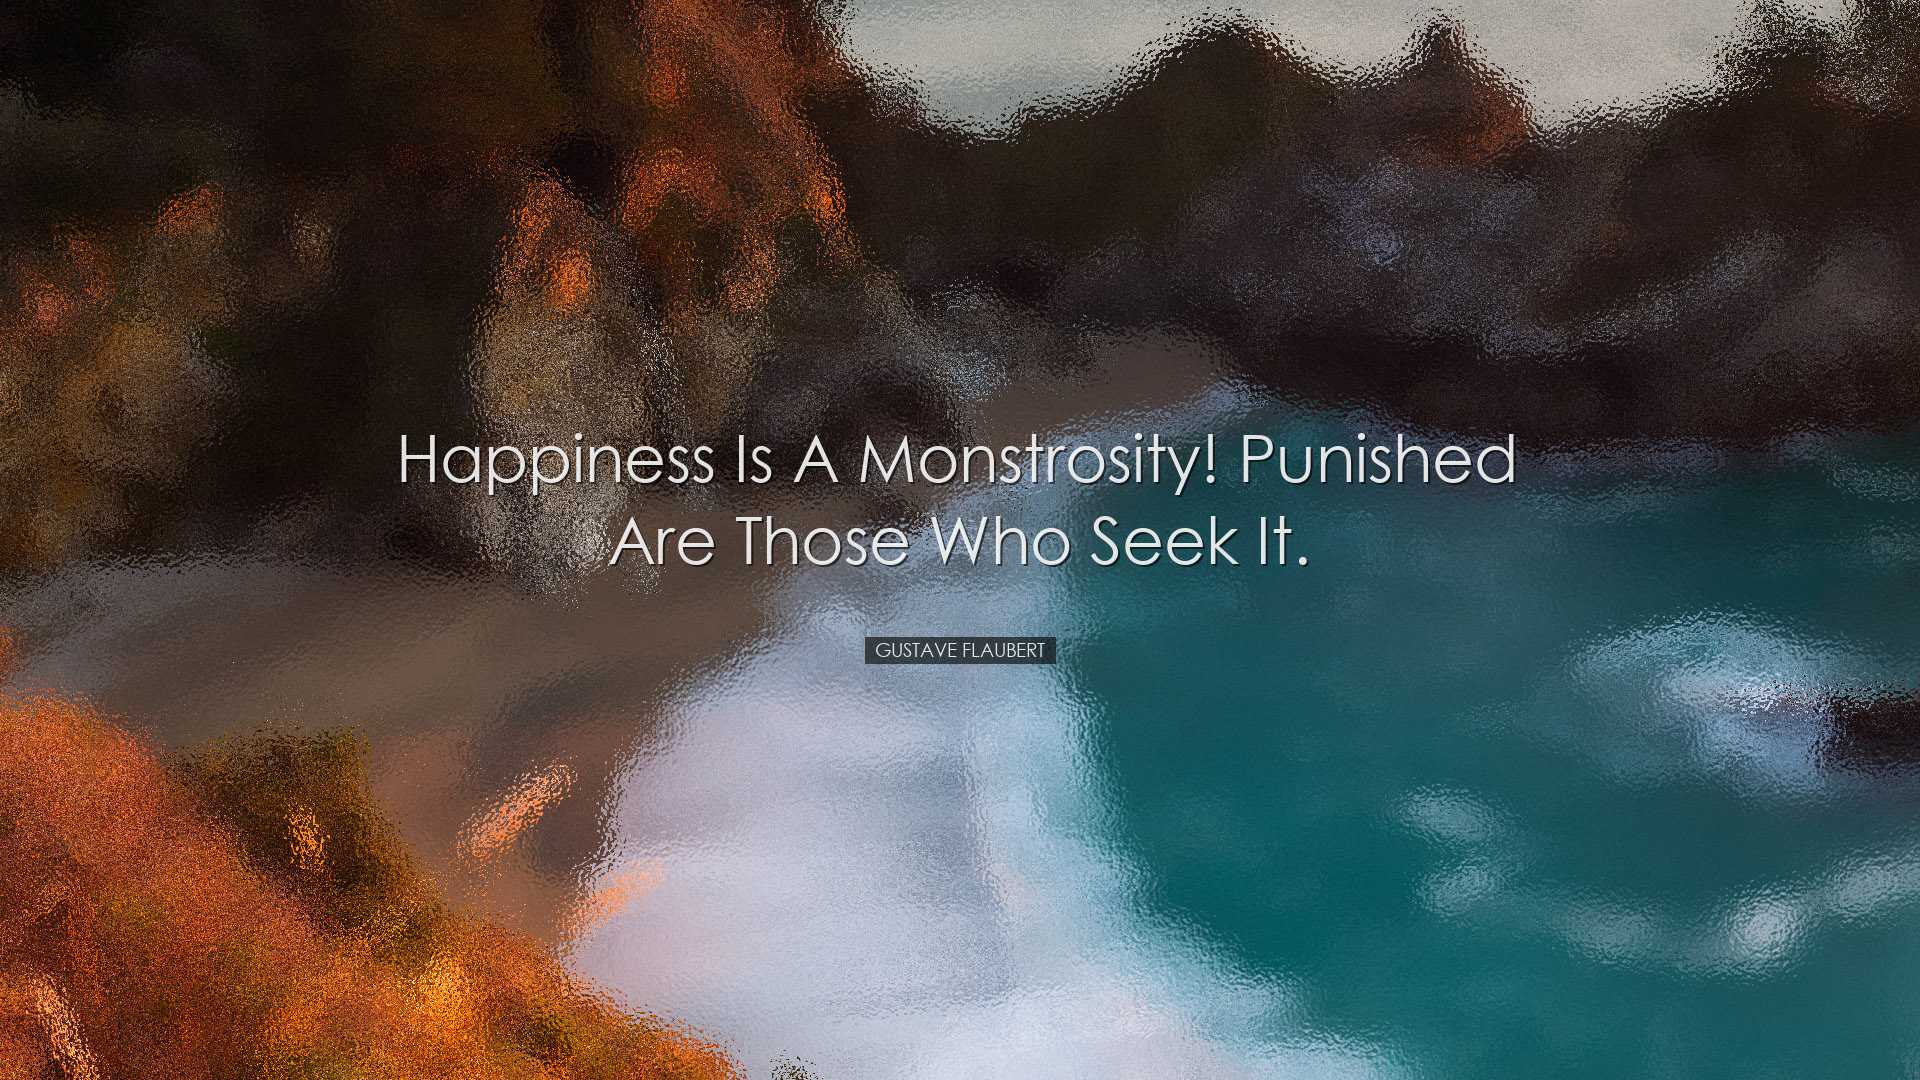 Happiness is a monstrosity! Punished are those who seek it. - Gust